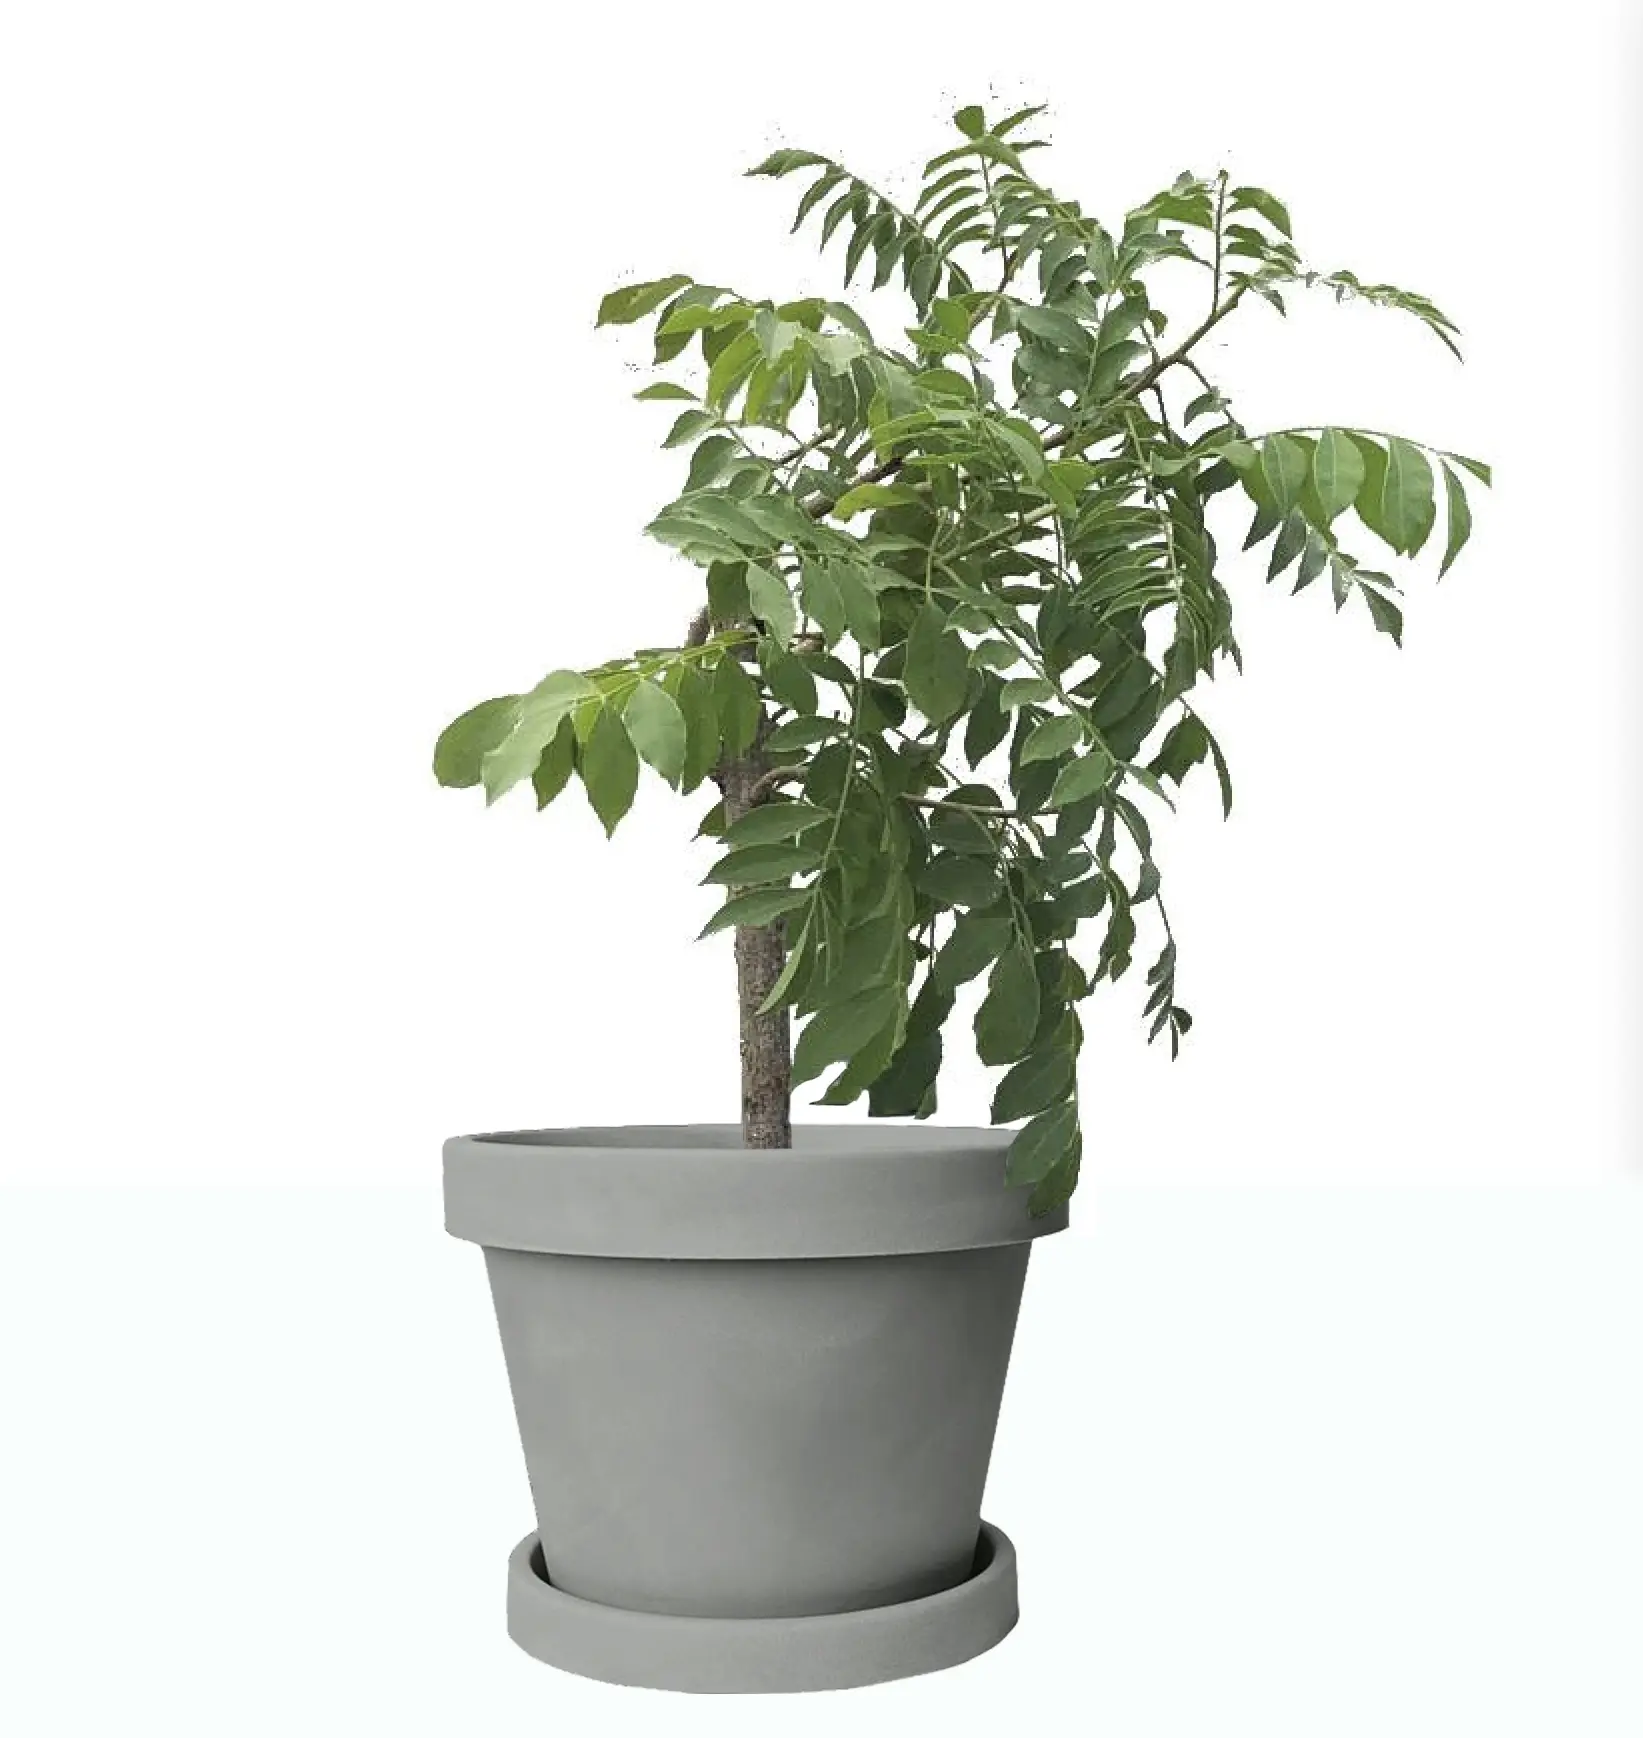 Image of Hog Plum Tree (Age: 1 Year Height: 1 TO 2 FT Size: 5 L)